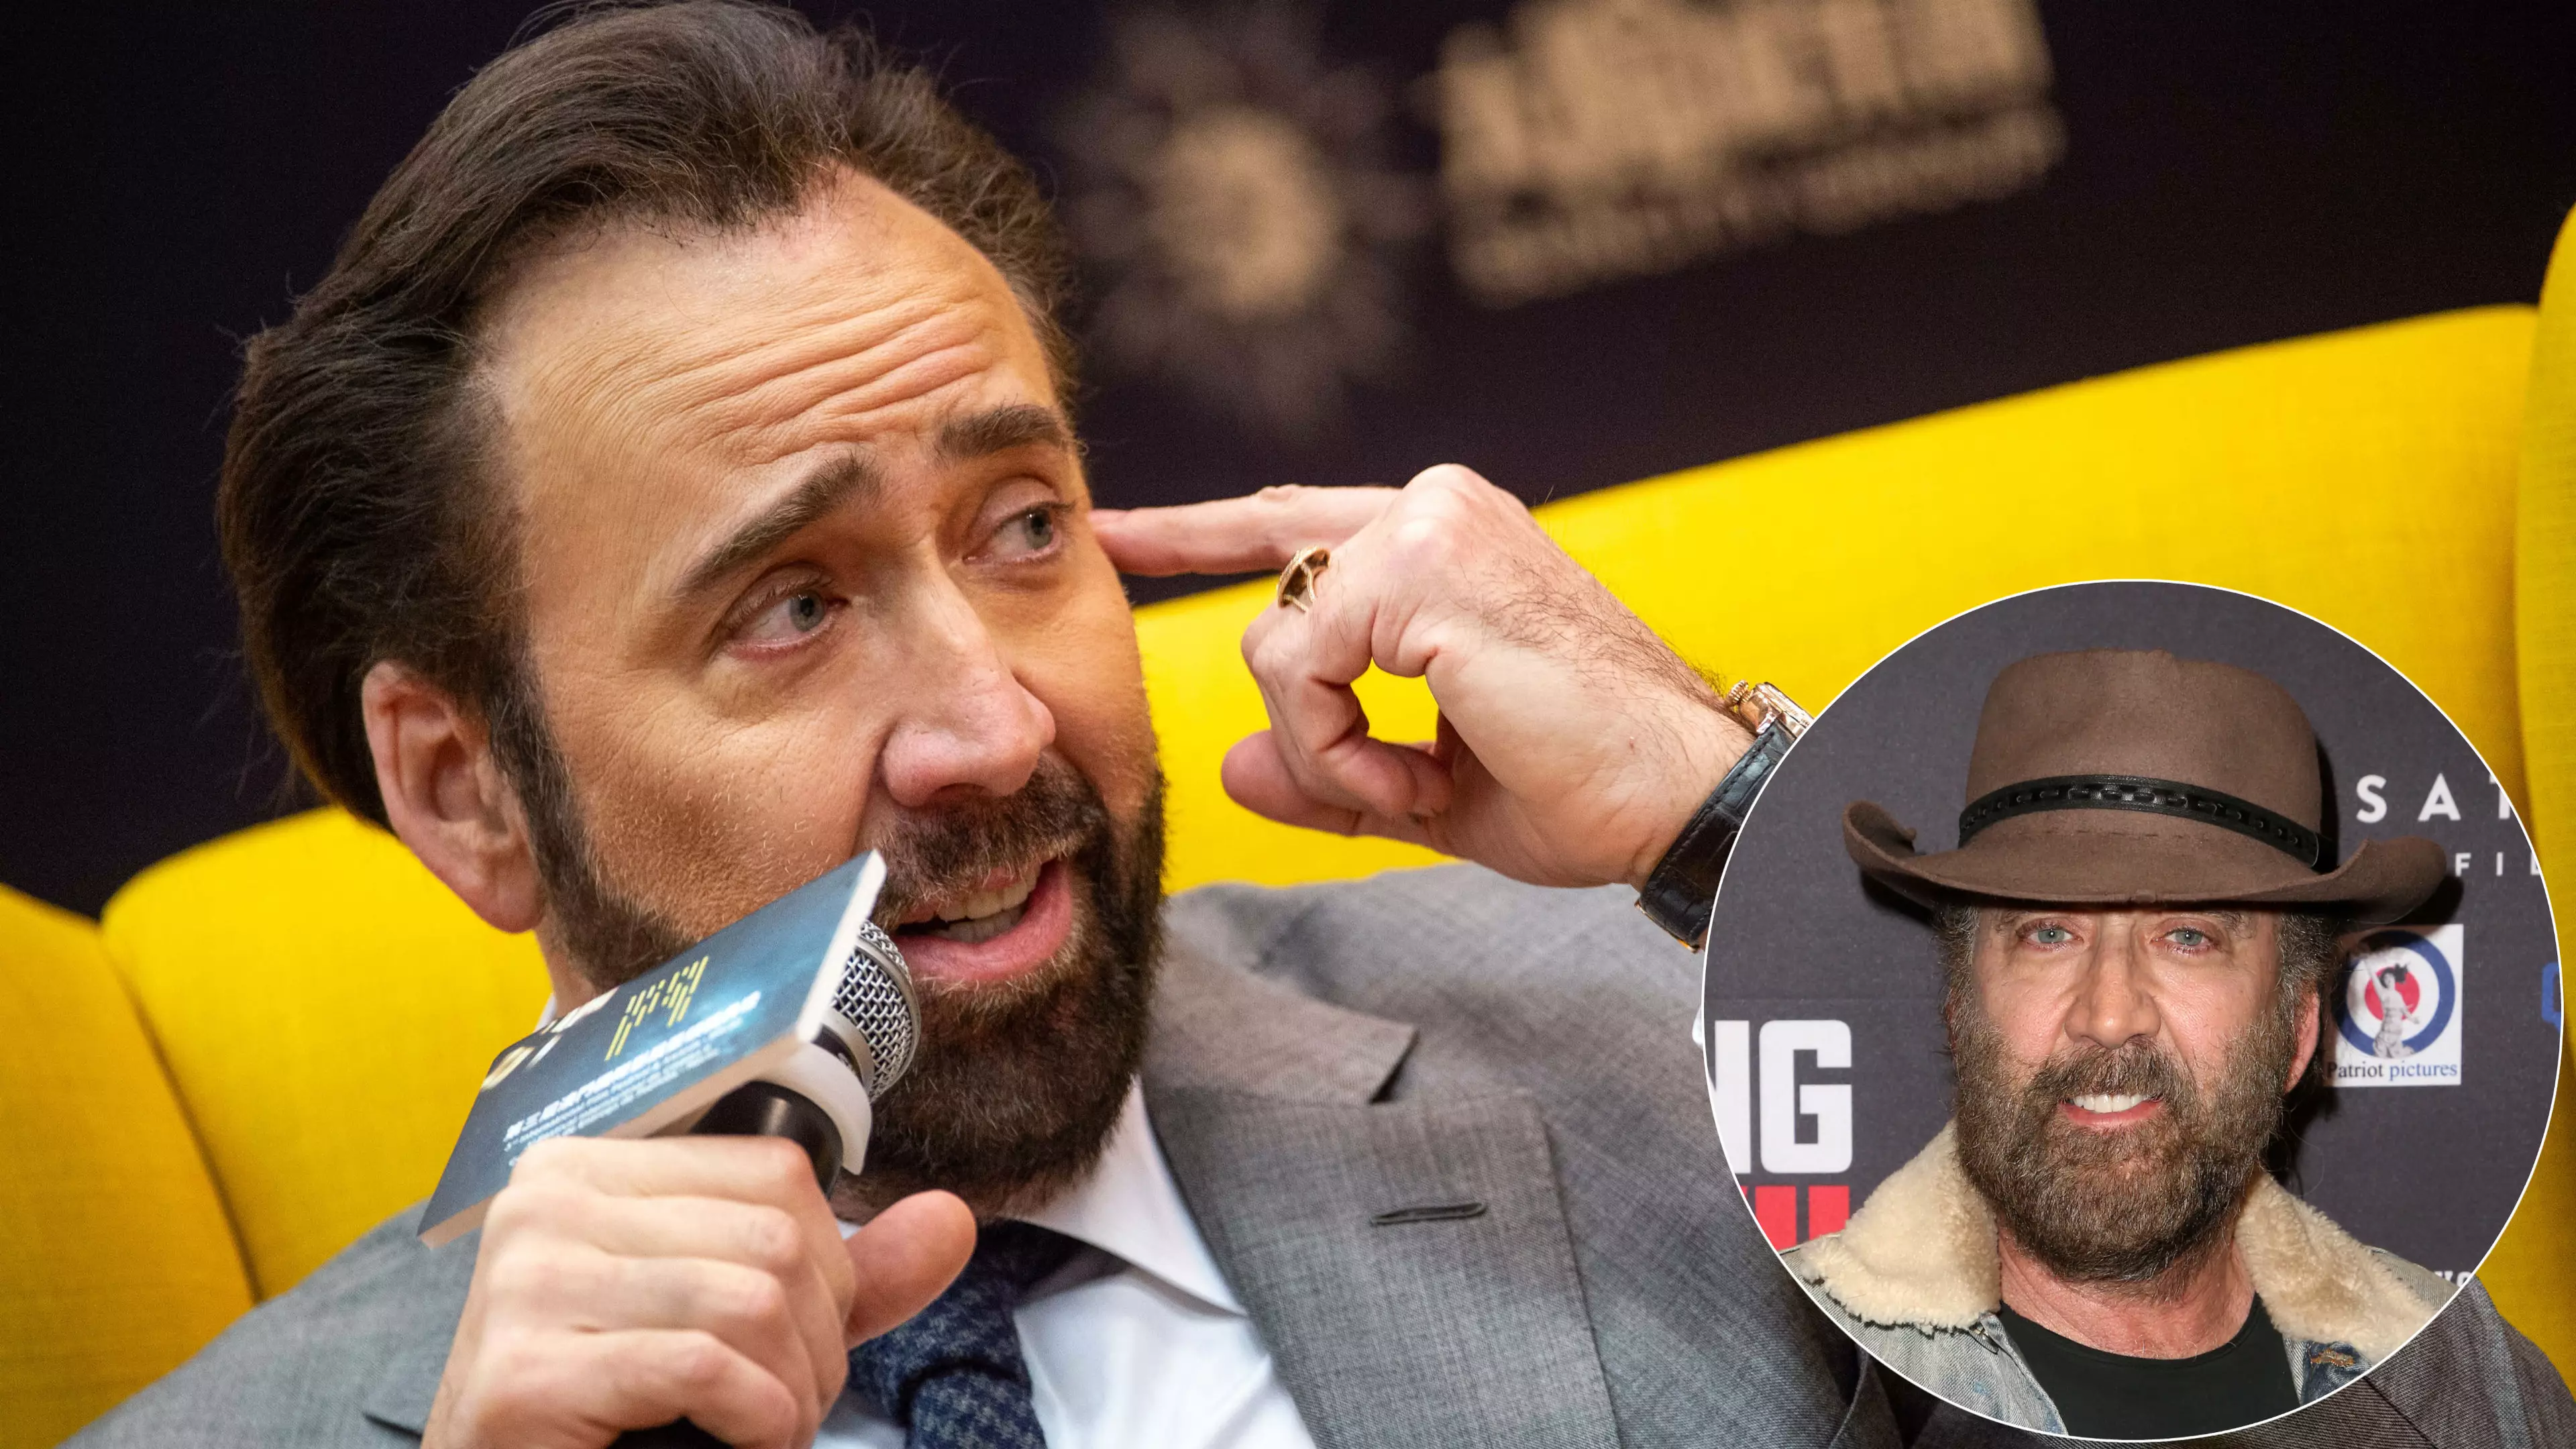 The Unbearable Weight Of Massive Talent Starring Nicolas Cage As Nicolas Cage Gets March 2021 Release Date